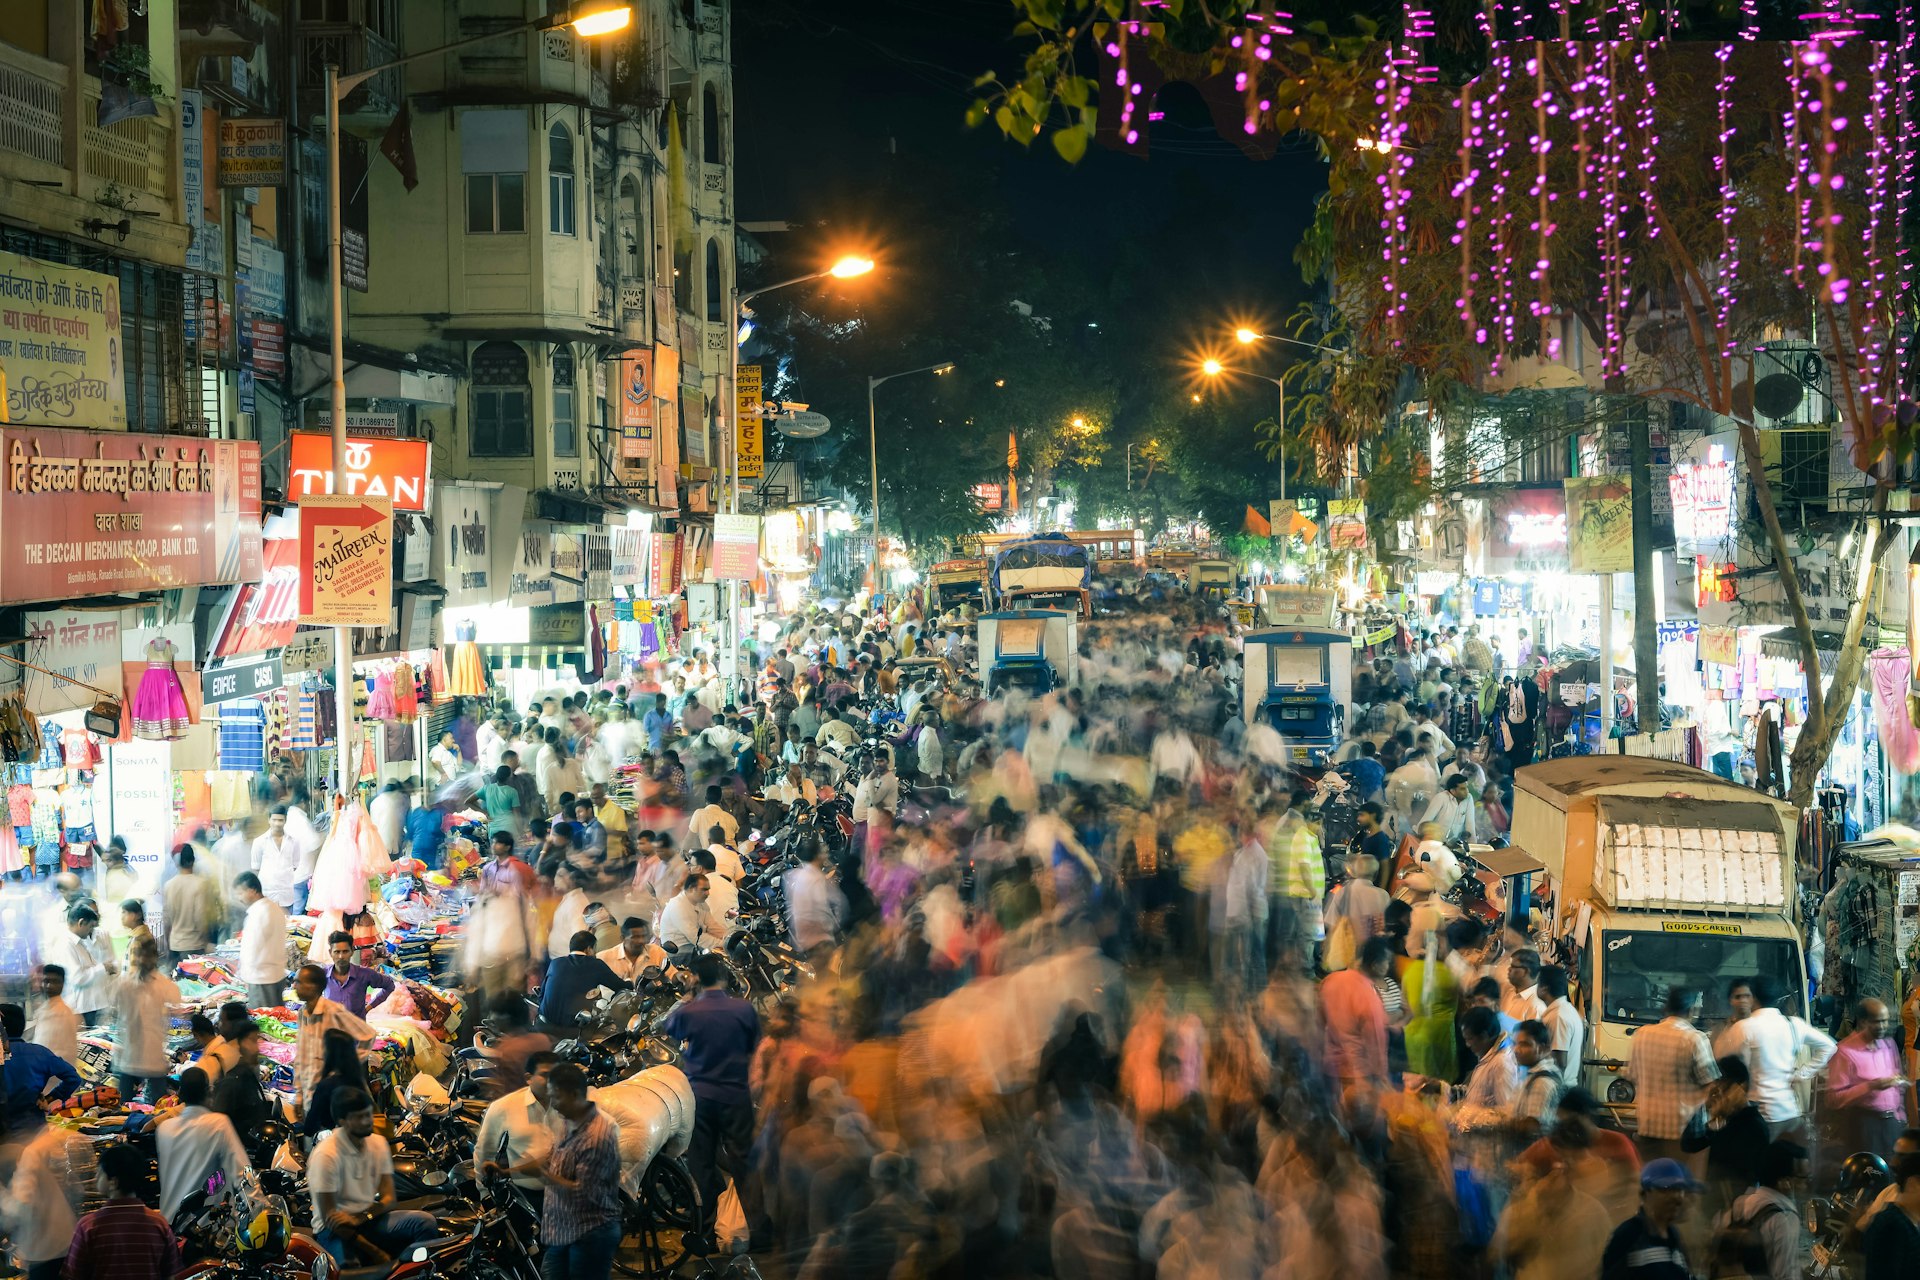 A view of a very busy road in Mumbai, flanked on either side by makeshift stalls and shops. The crowds walking through the street are blurred slightly, giving the appearance that they are in motion.